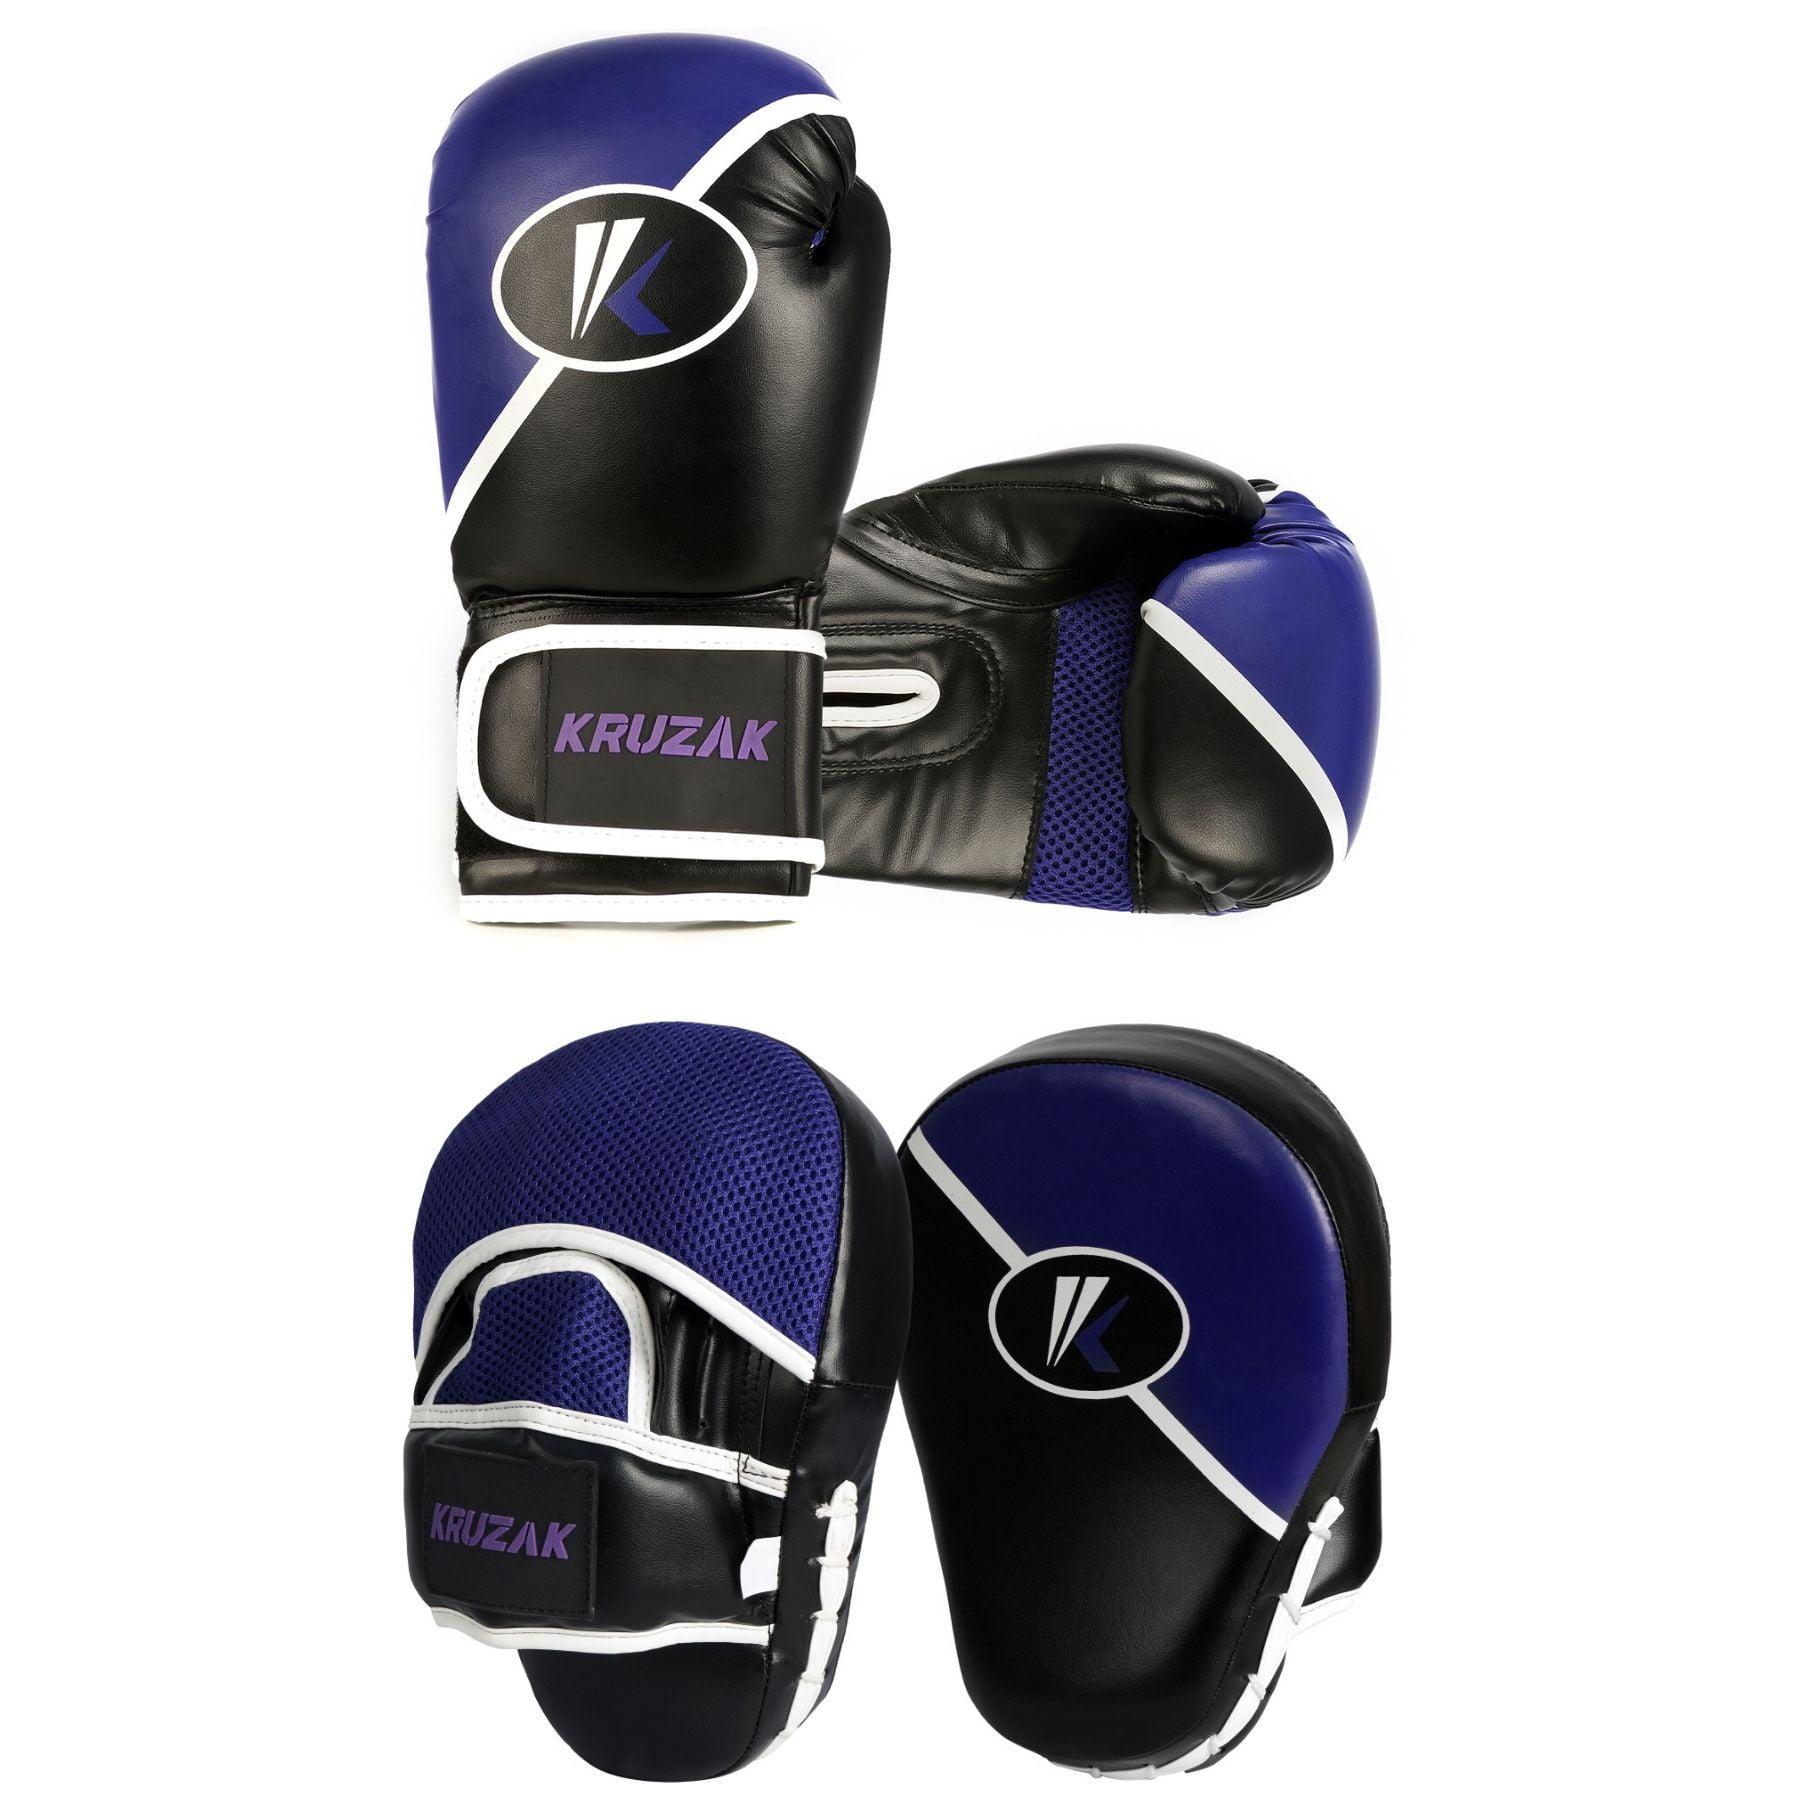 Training of Karate Muay Thai Boxing Fight Punch Gloves Focus Pad Set Fitness 